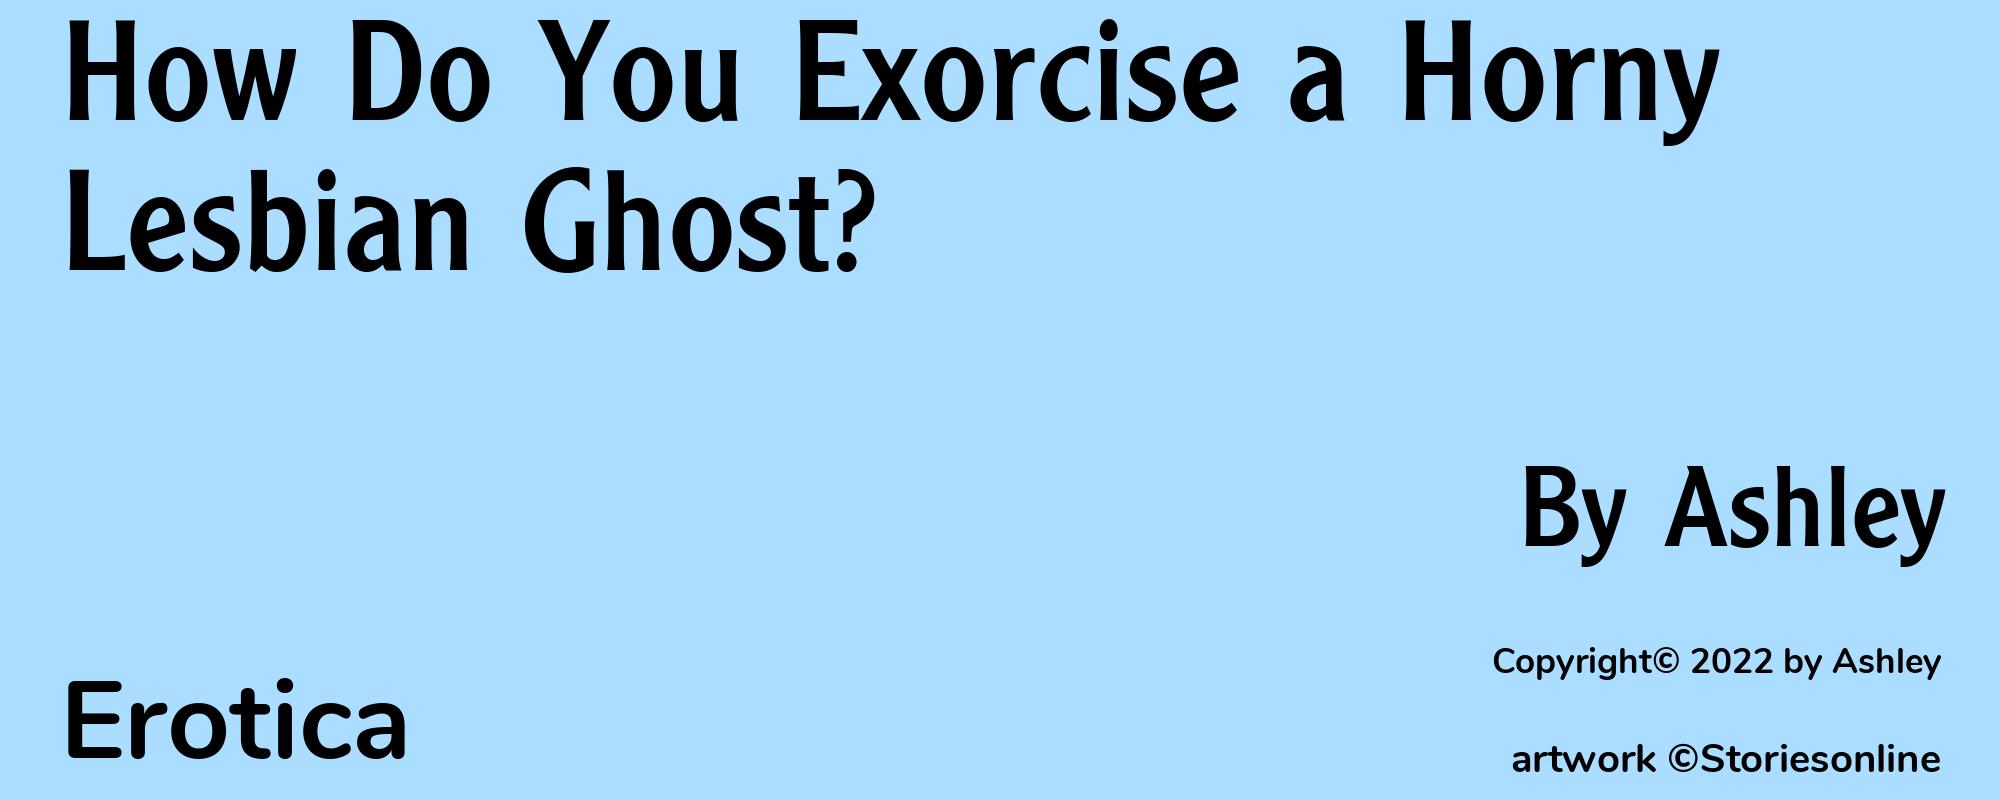 How Do You Exorcise a Horny Lesbian Ghost? - Cover